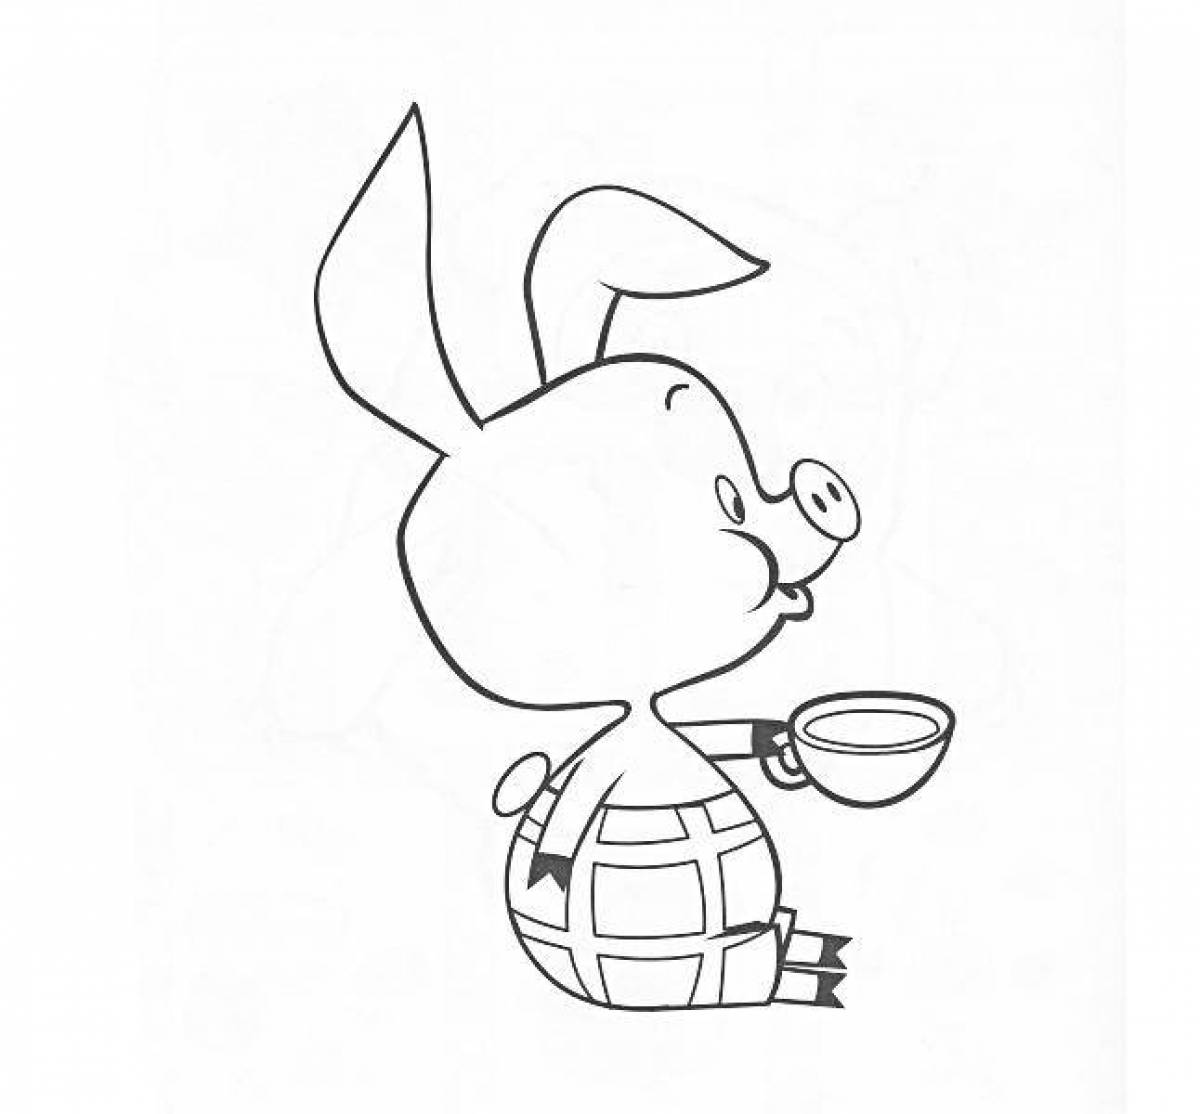 Sunny pig coloring page